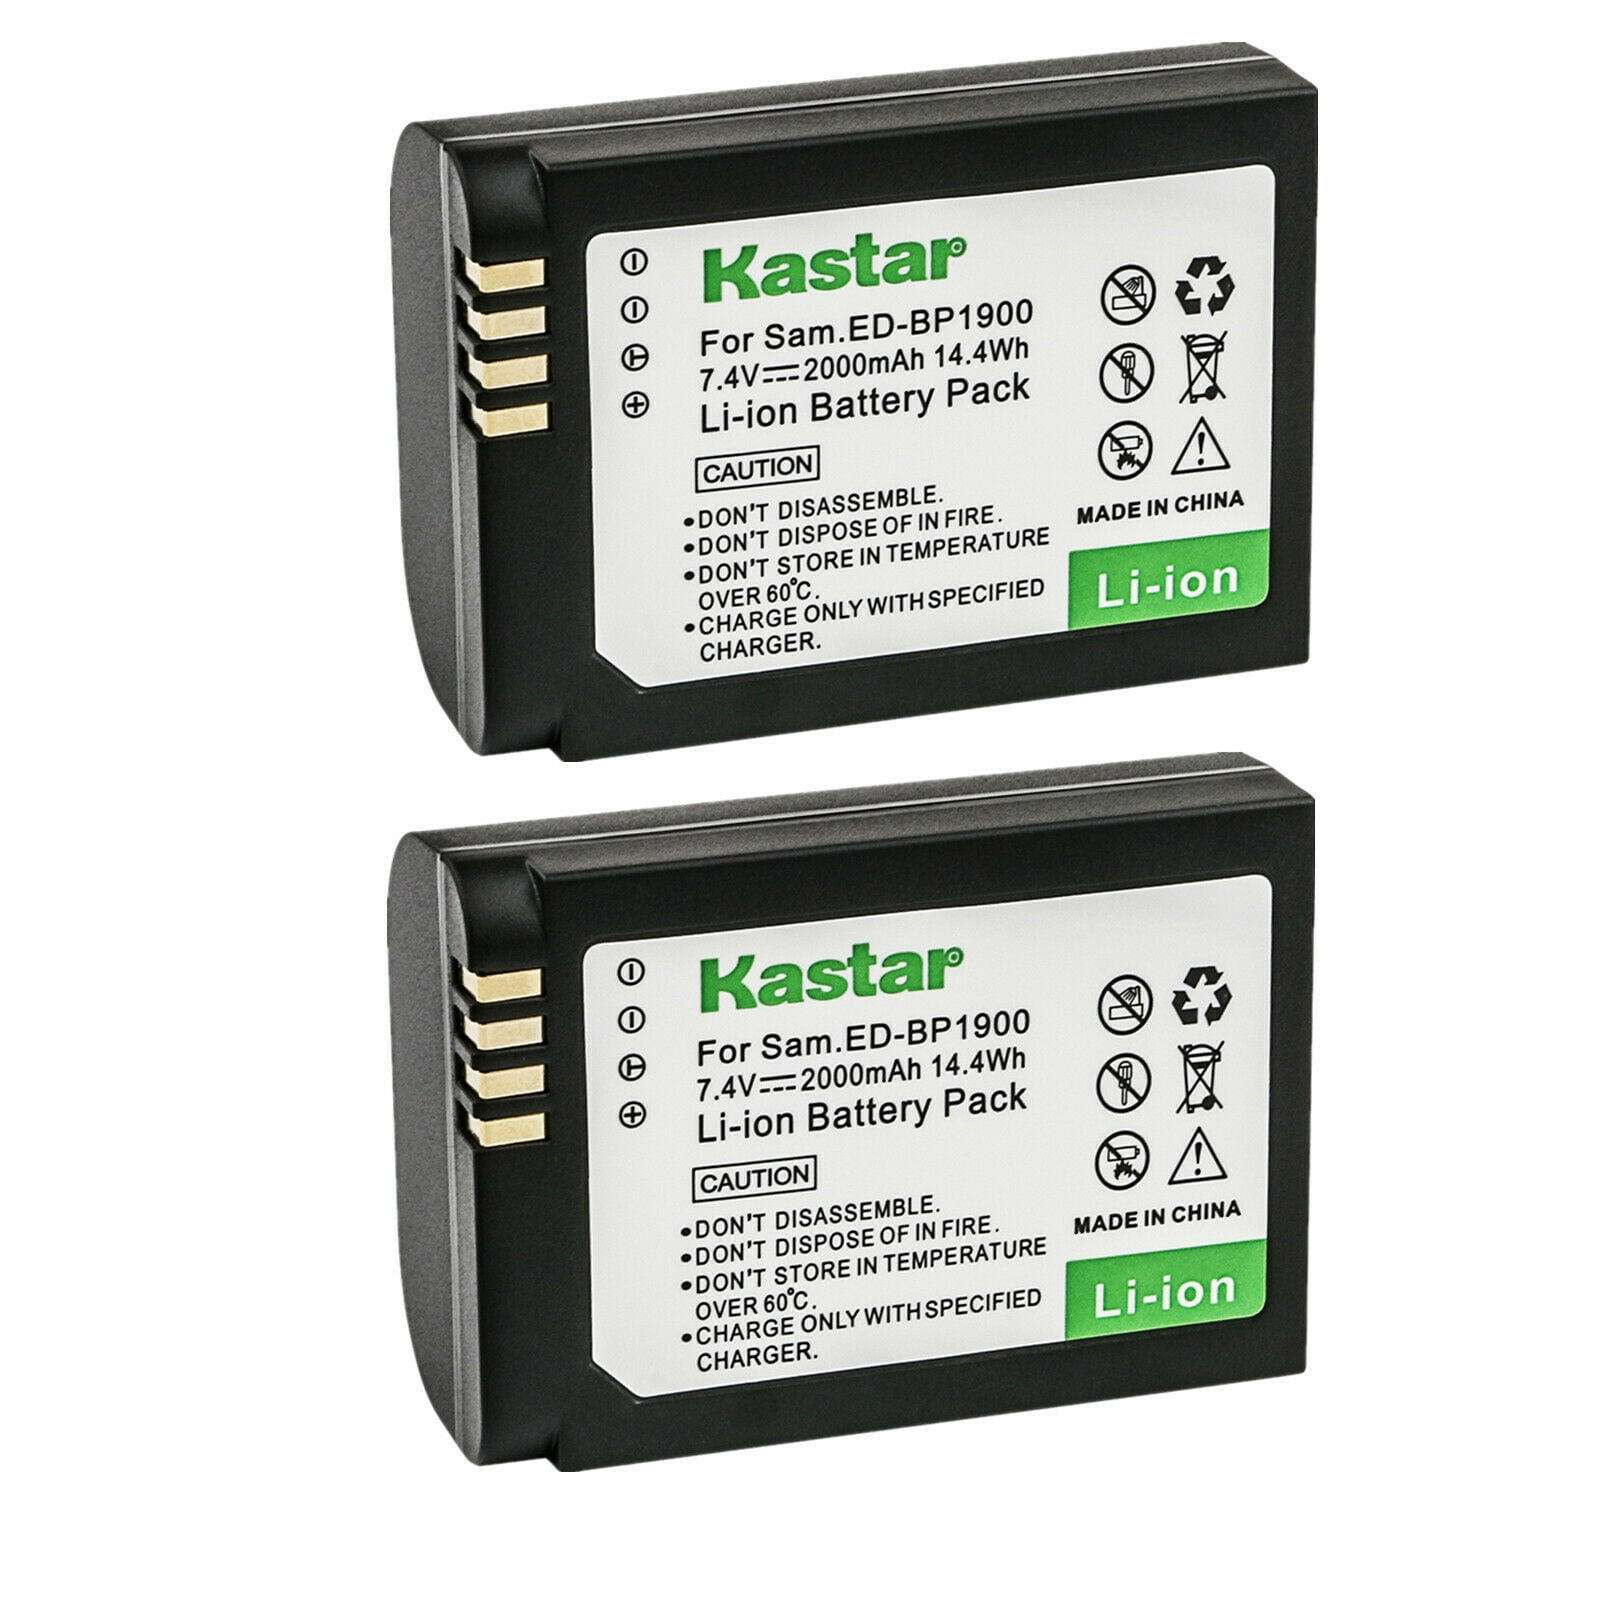 BP-1900 BP1900 Battery ED-BC4NX03/US Charger Kastar 4-Pack BP1900 Battery and LCD AC Charger Compatible with Samsung ED-BP1900 EDBP1900 ED-BP1900/US Samsung ED-BC4NX03 Samsung NX1 Digital Camera